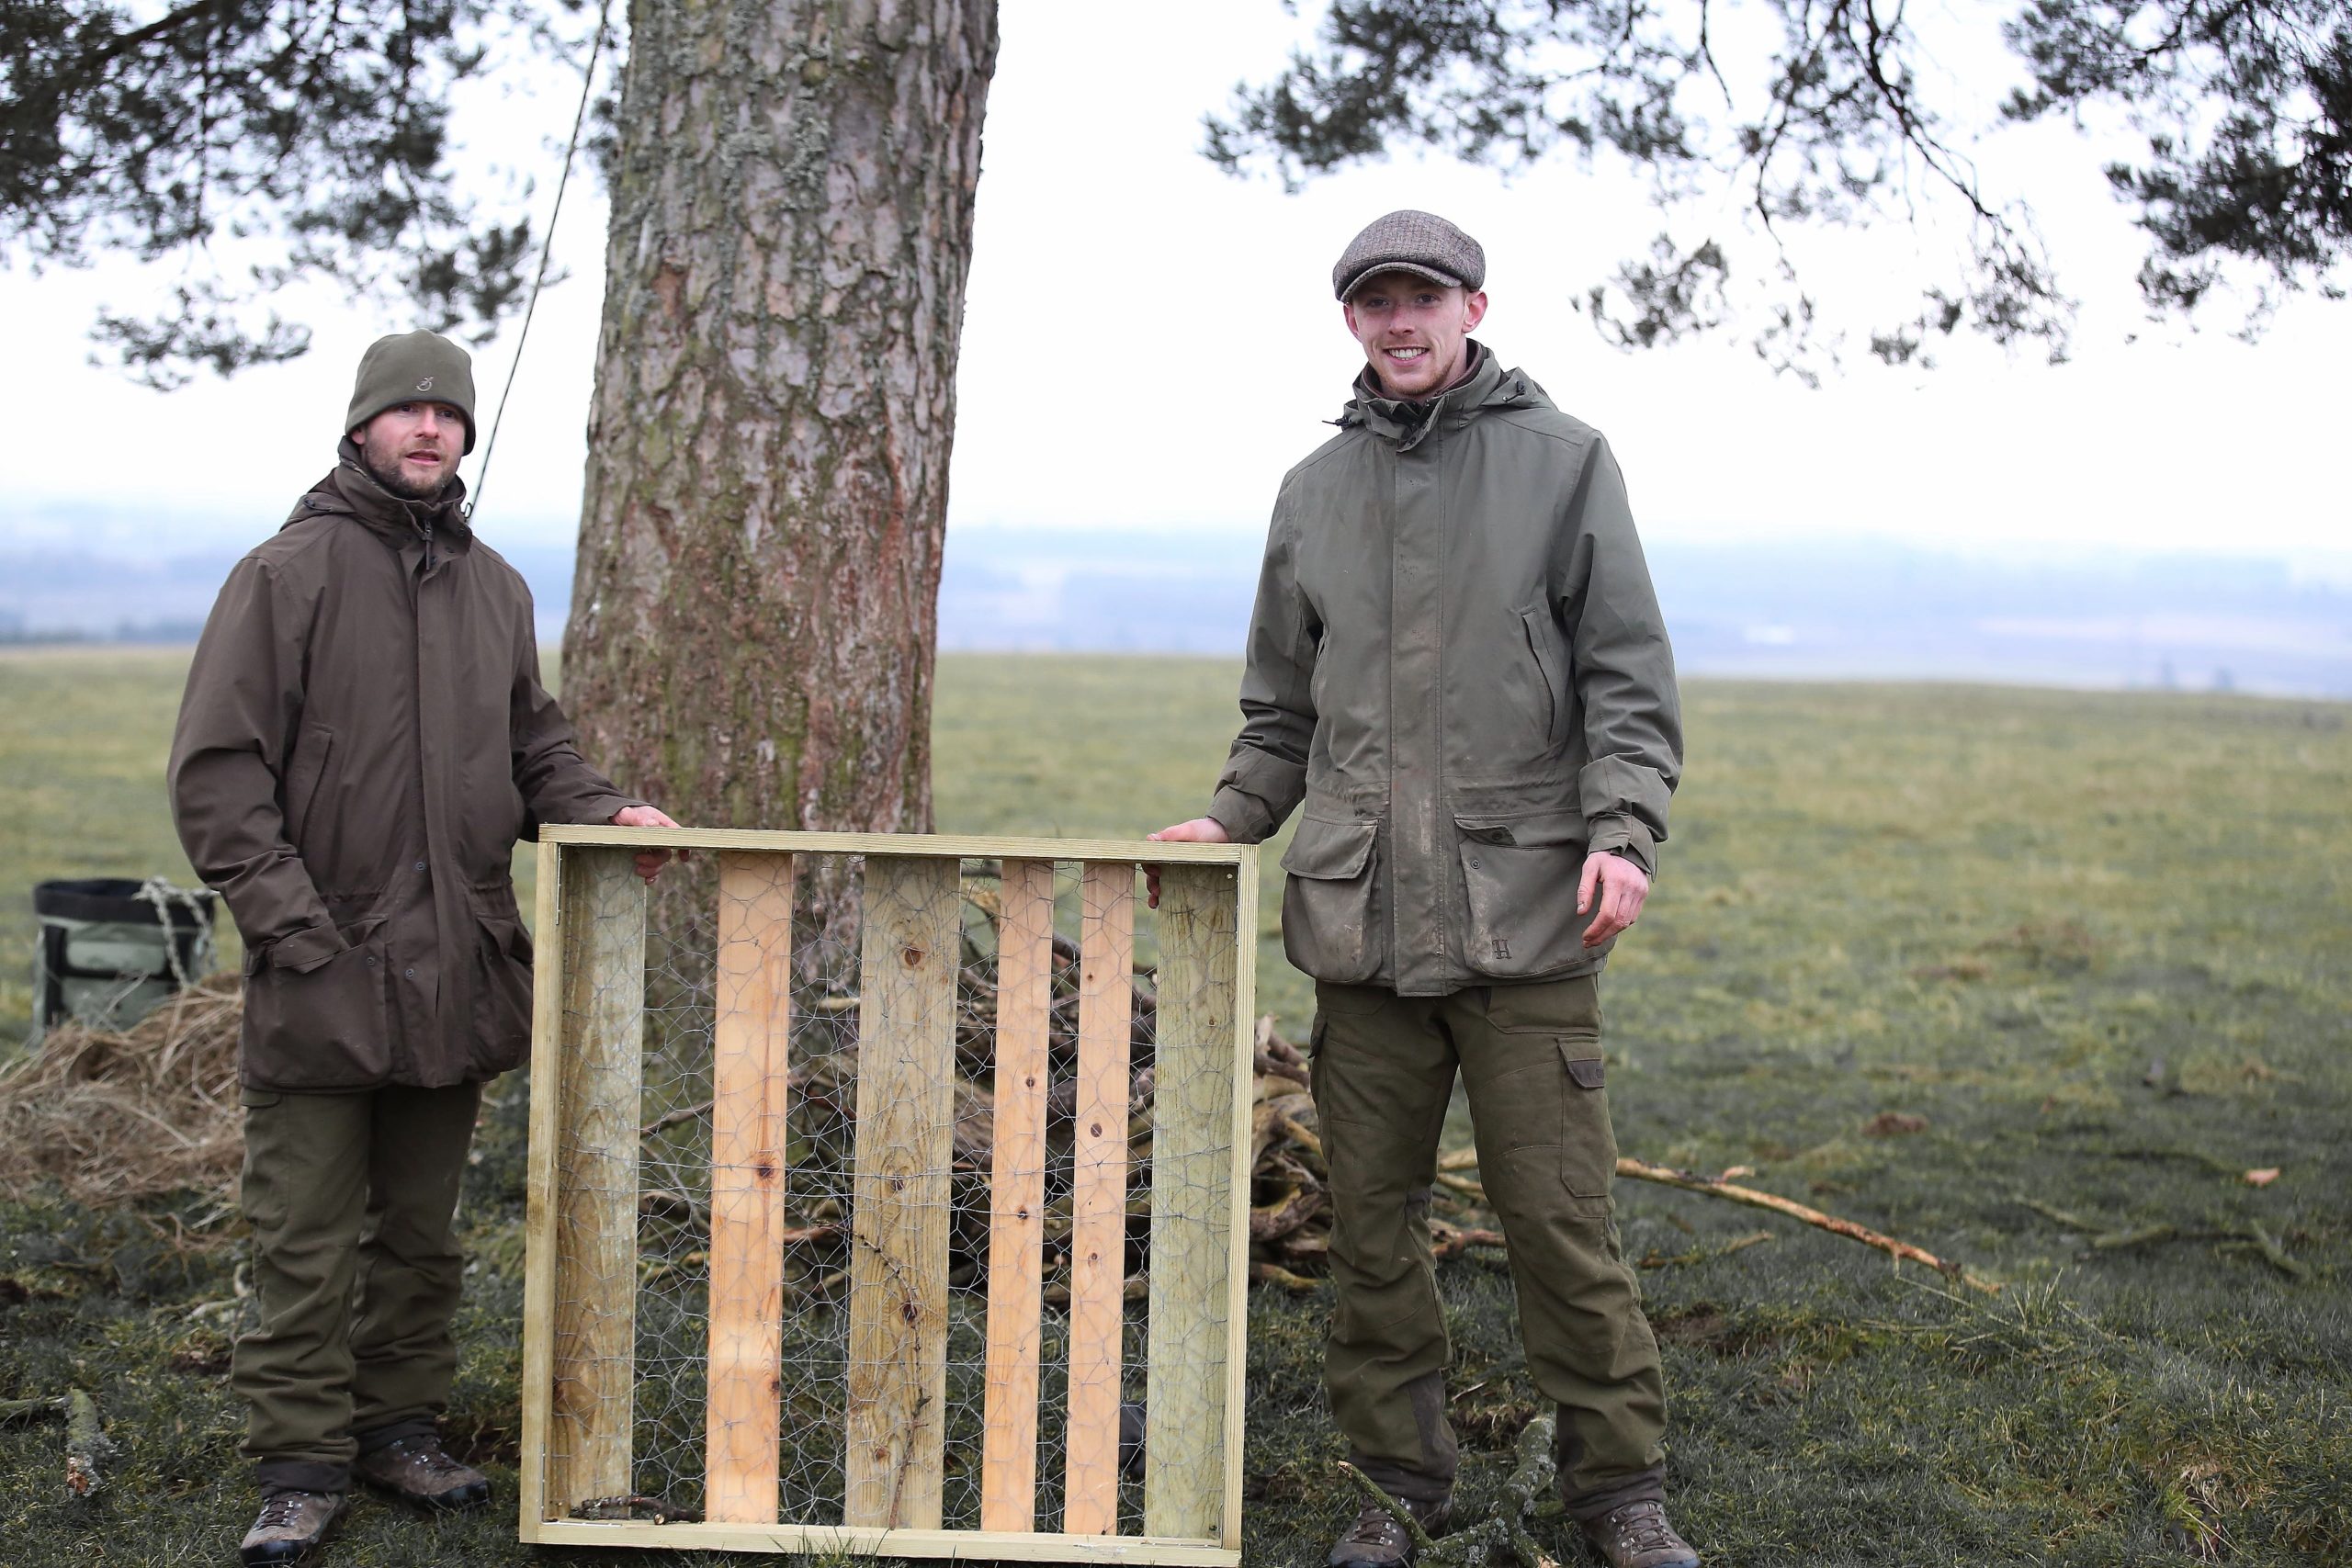 Gamekeepers: Barry Wilkie and Ethan Bulman helped with the erection of the platform.